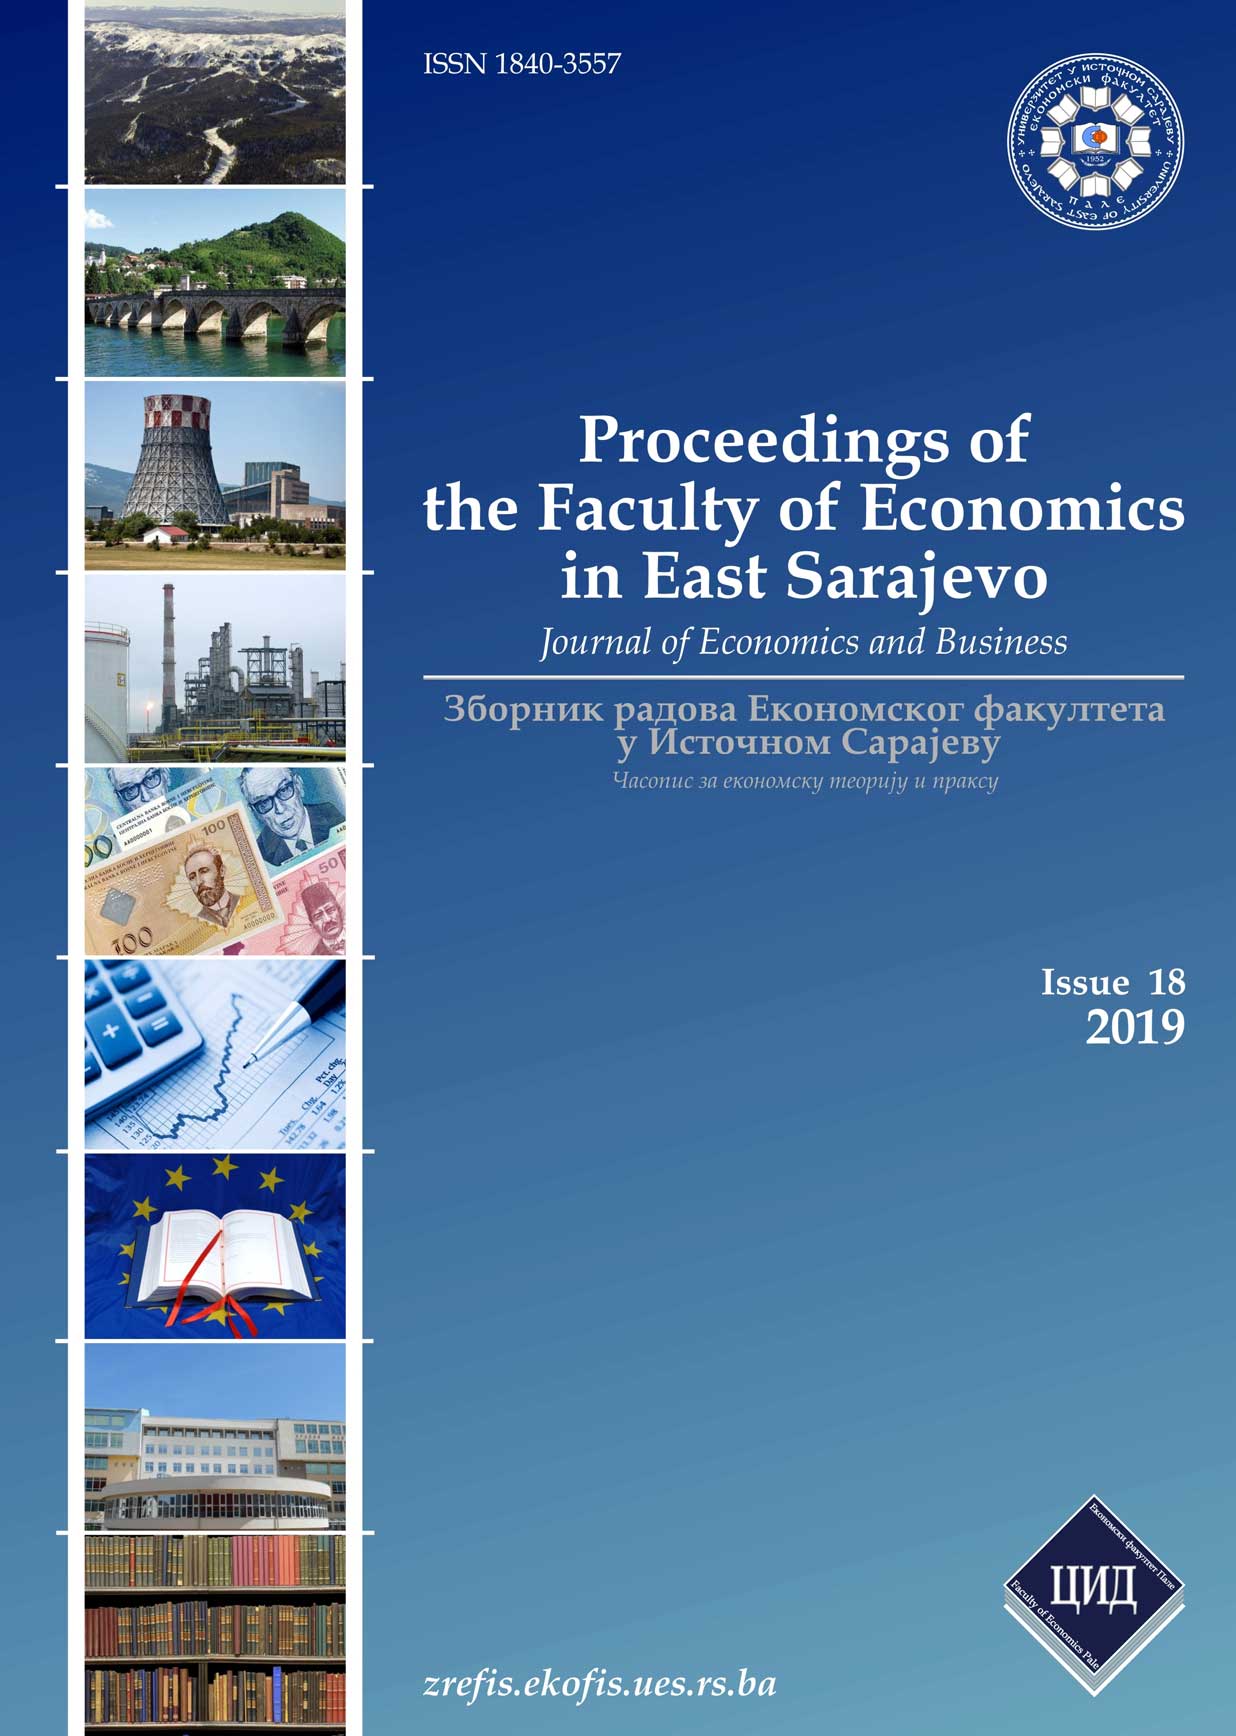 ECONOMIC GROWTH MODEL FOR BOSNIA AND HERZEGOVINA IN THE PERIOD 2007-2017 - OPPORTUNITIES FOR FUTURE RISKS REDUCTION - Cover Image